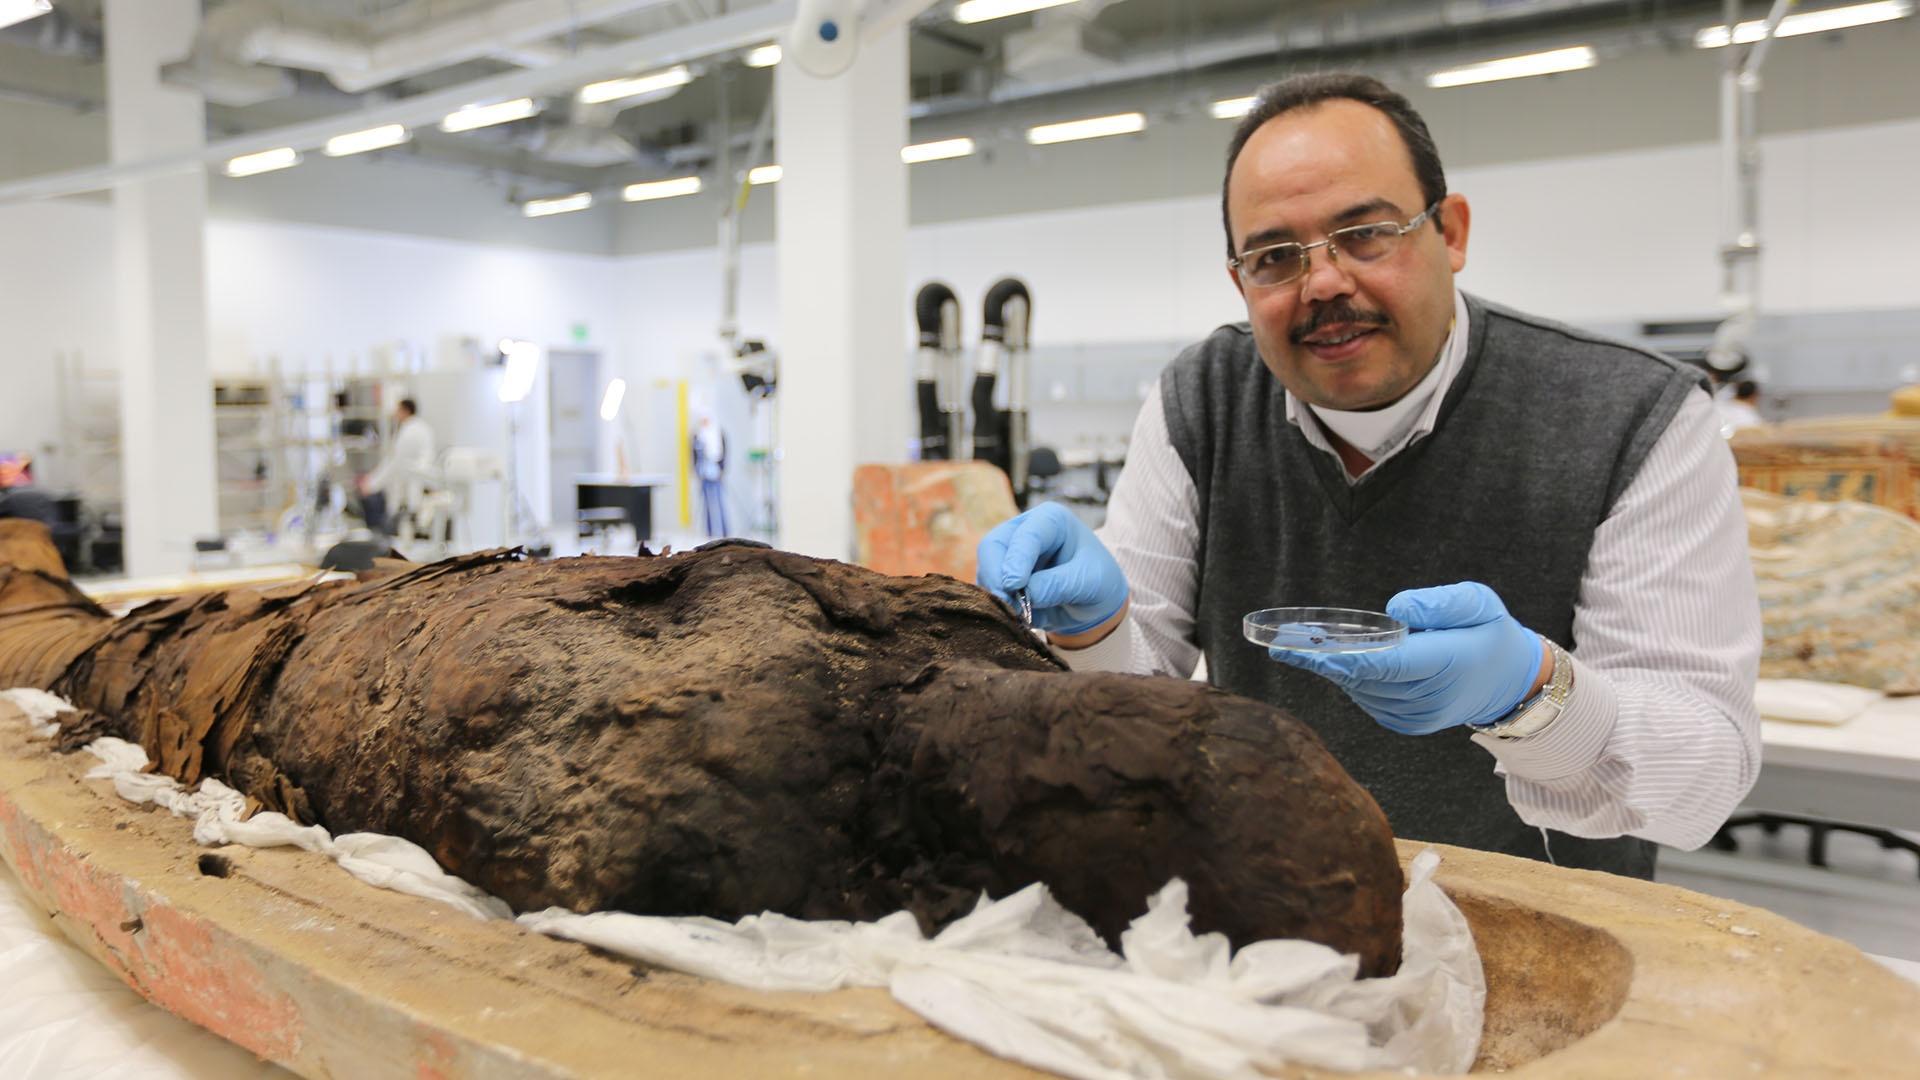 Dr. Medhat Abdallah at the GEM working on the conservation of a sarcophagus.